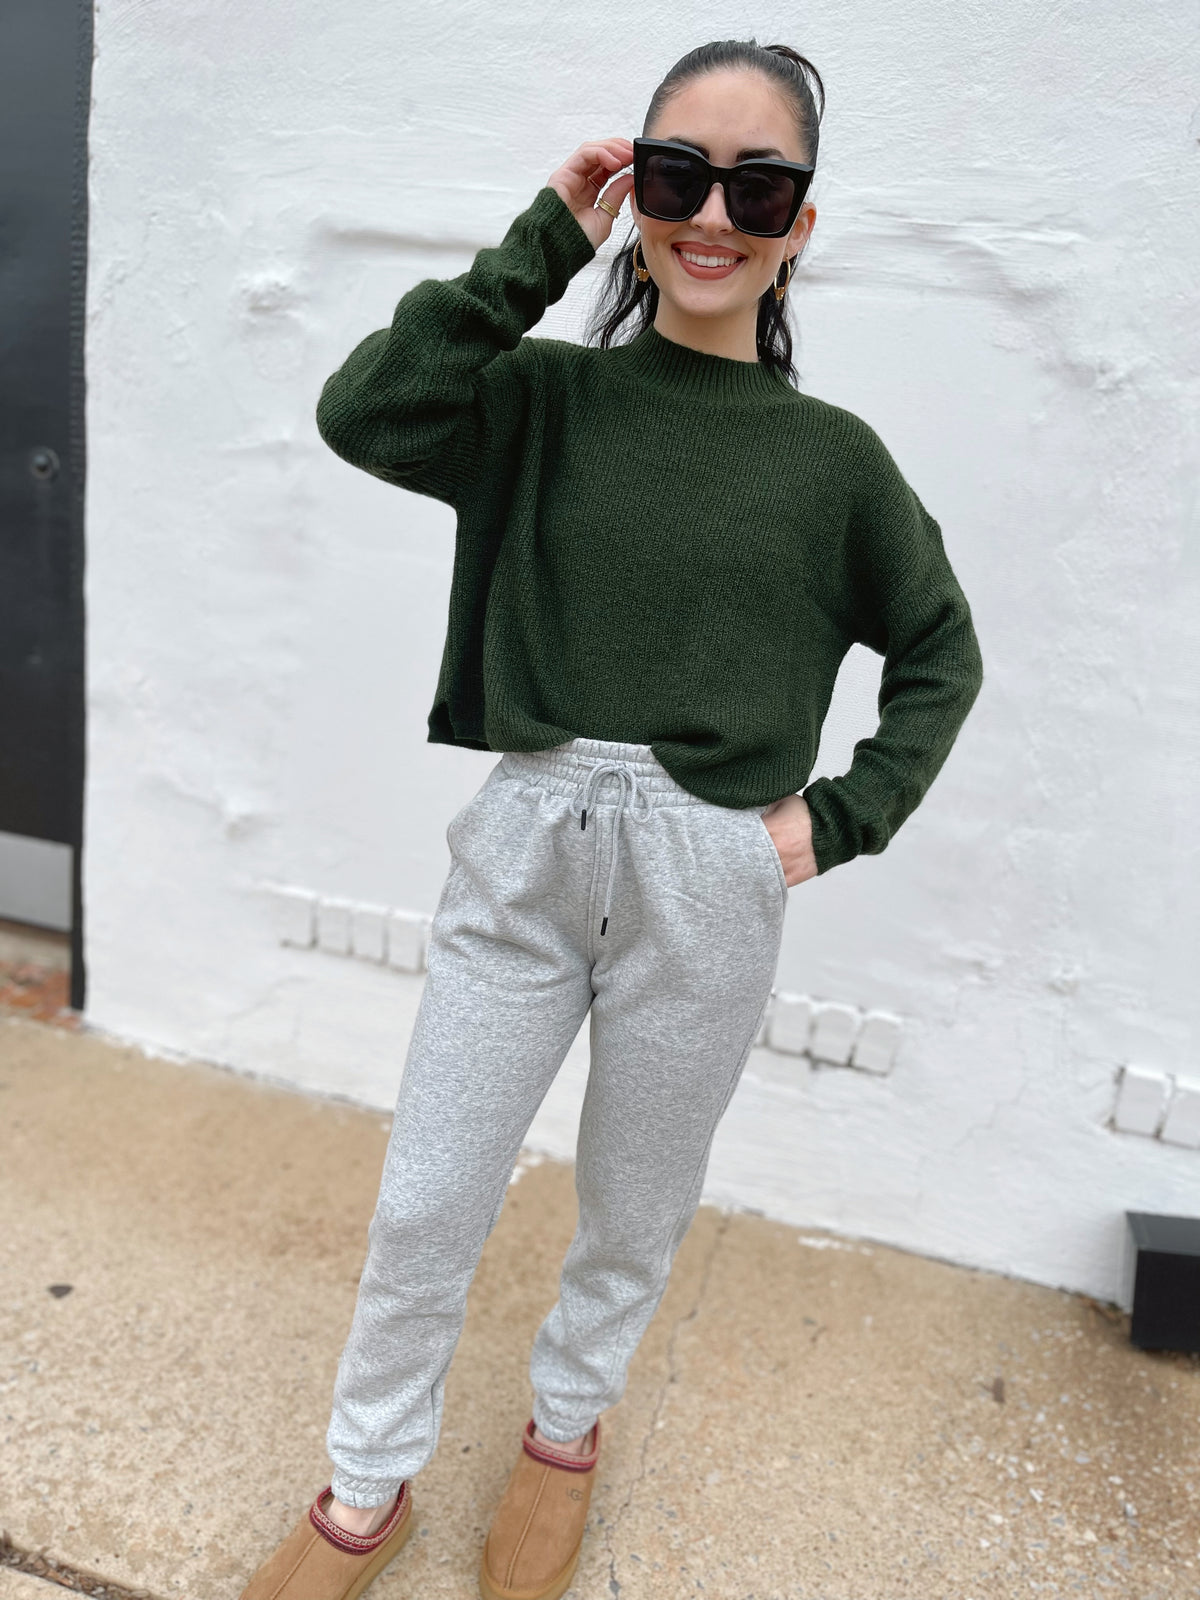 Kate Knit Cropped Sweater + Green